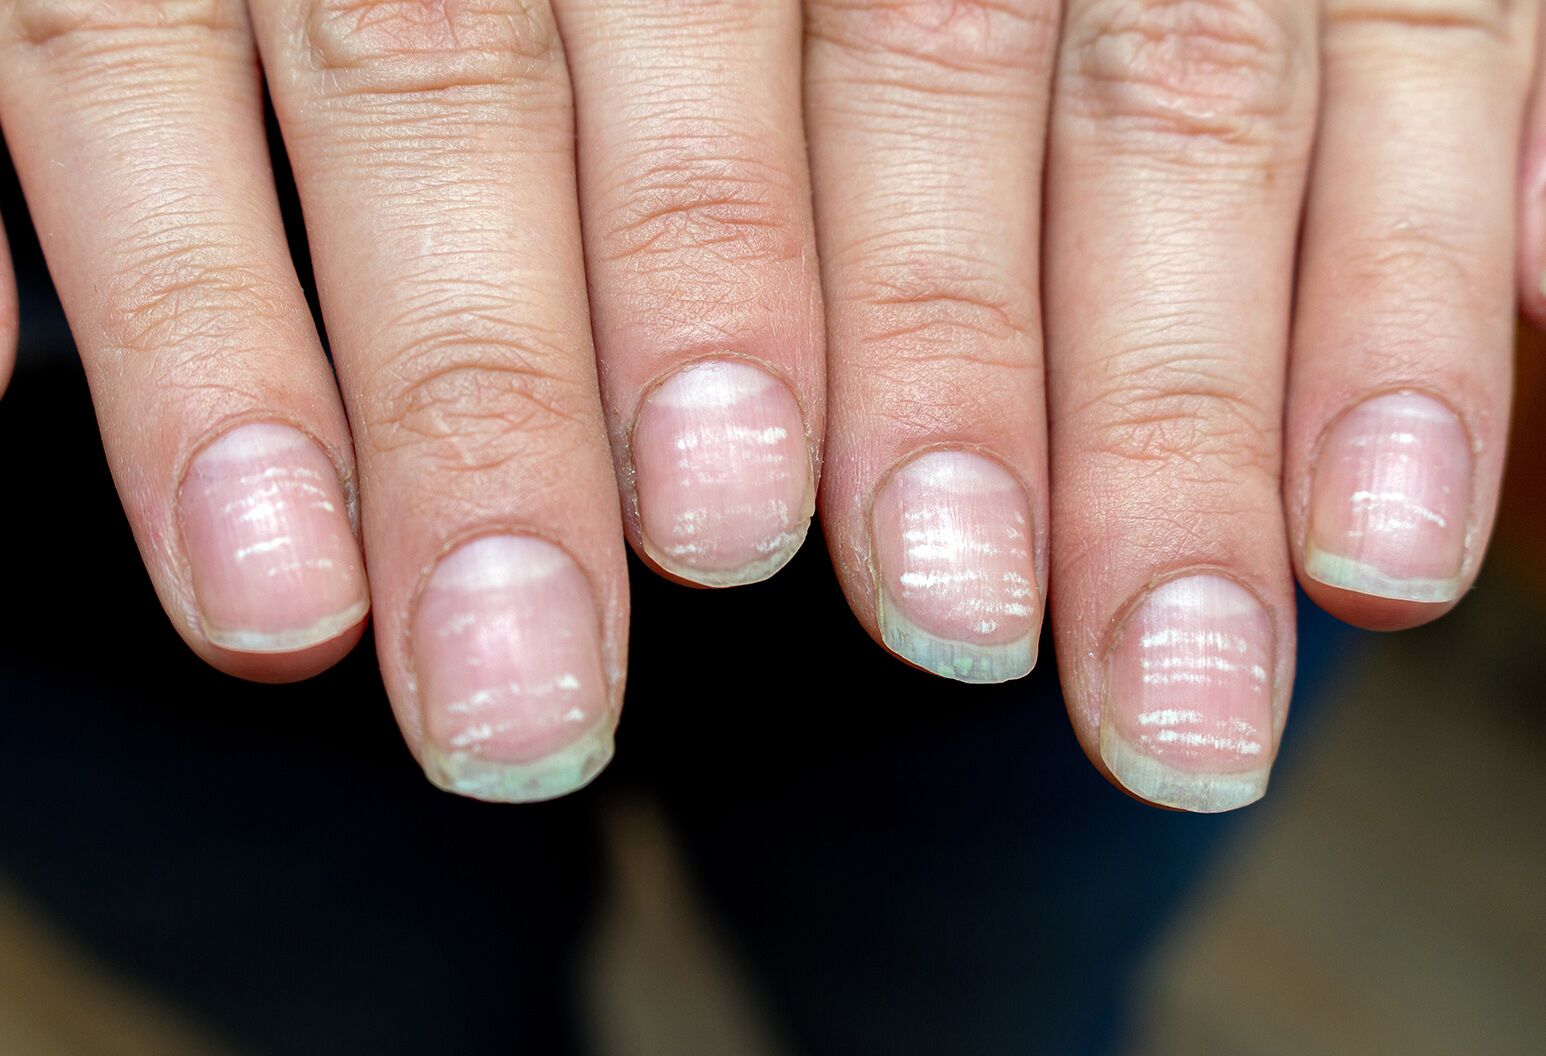 Lichen Planus of Nails: Causes, Symptoms and Treatment